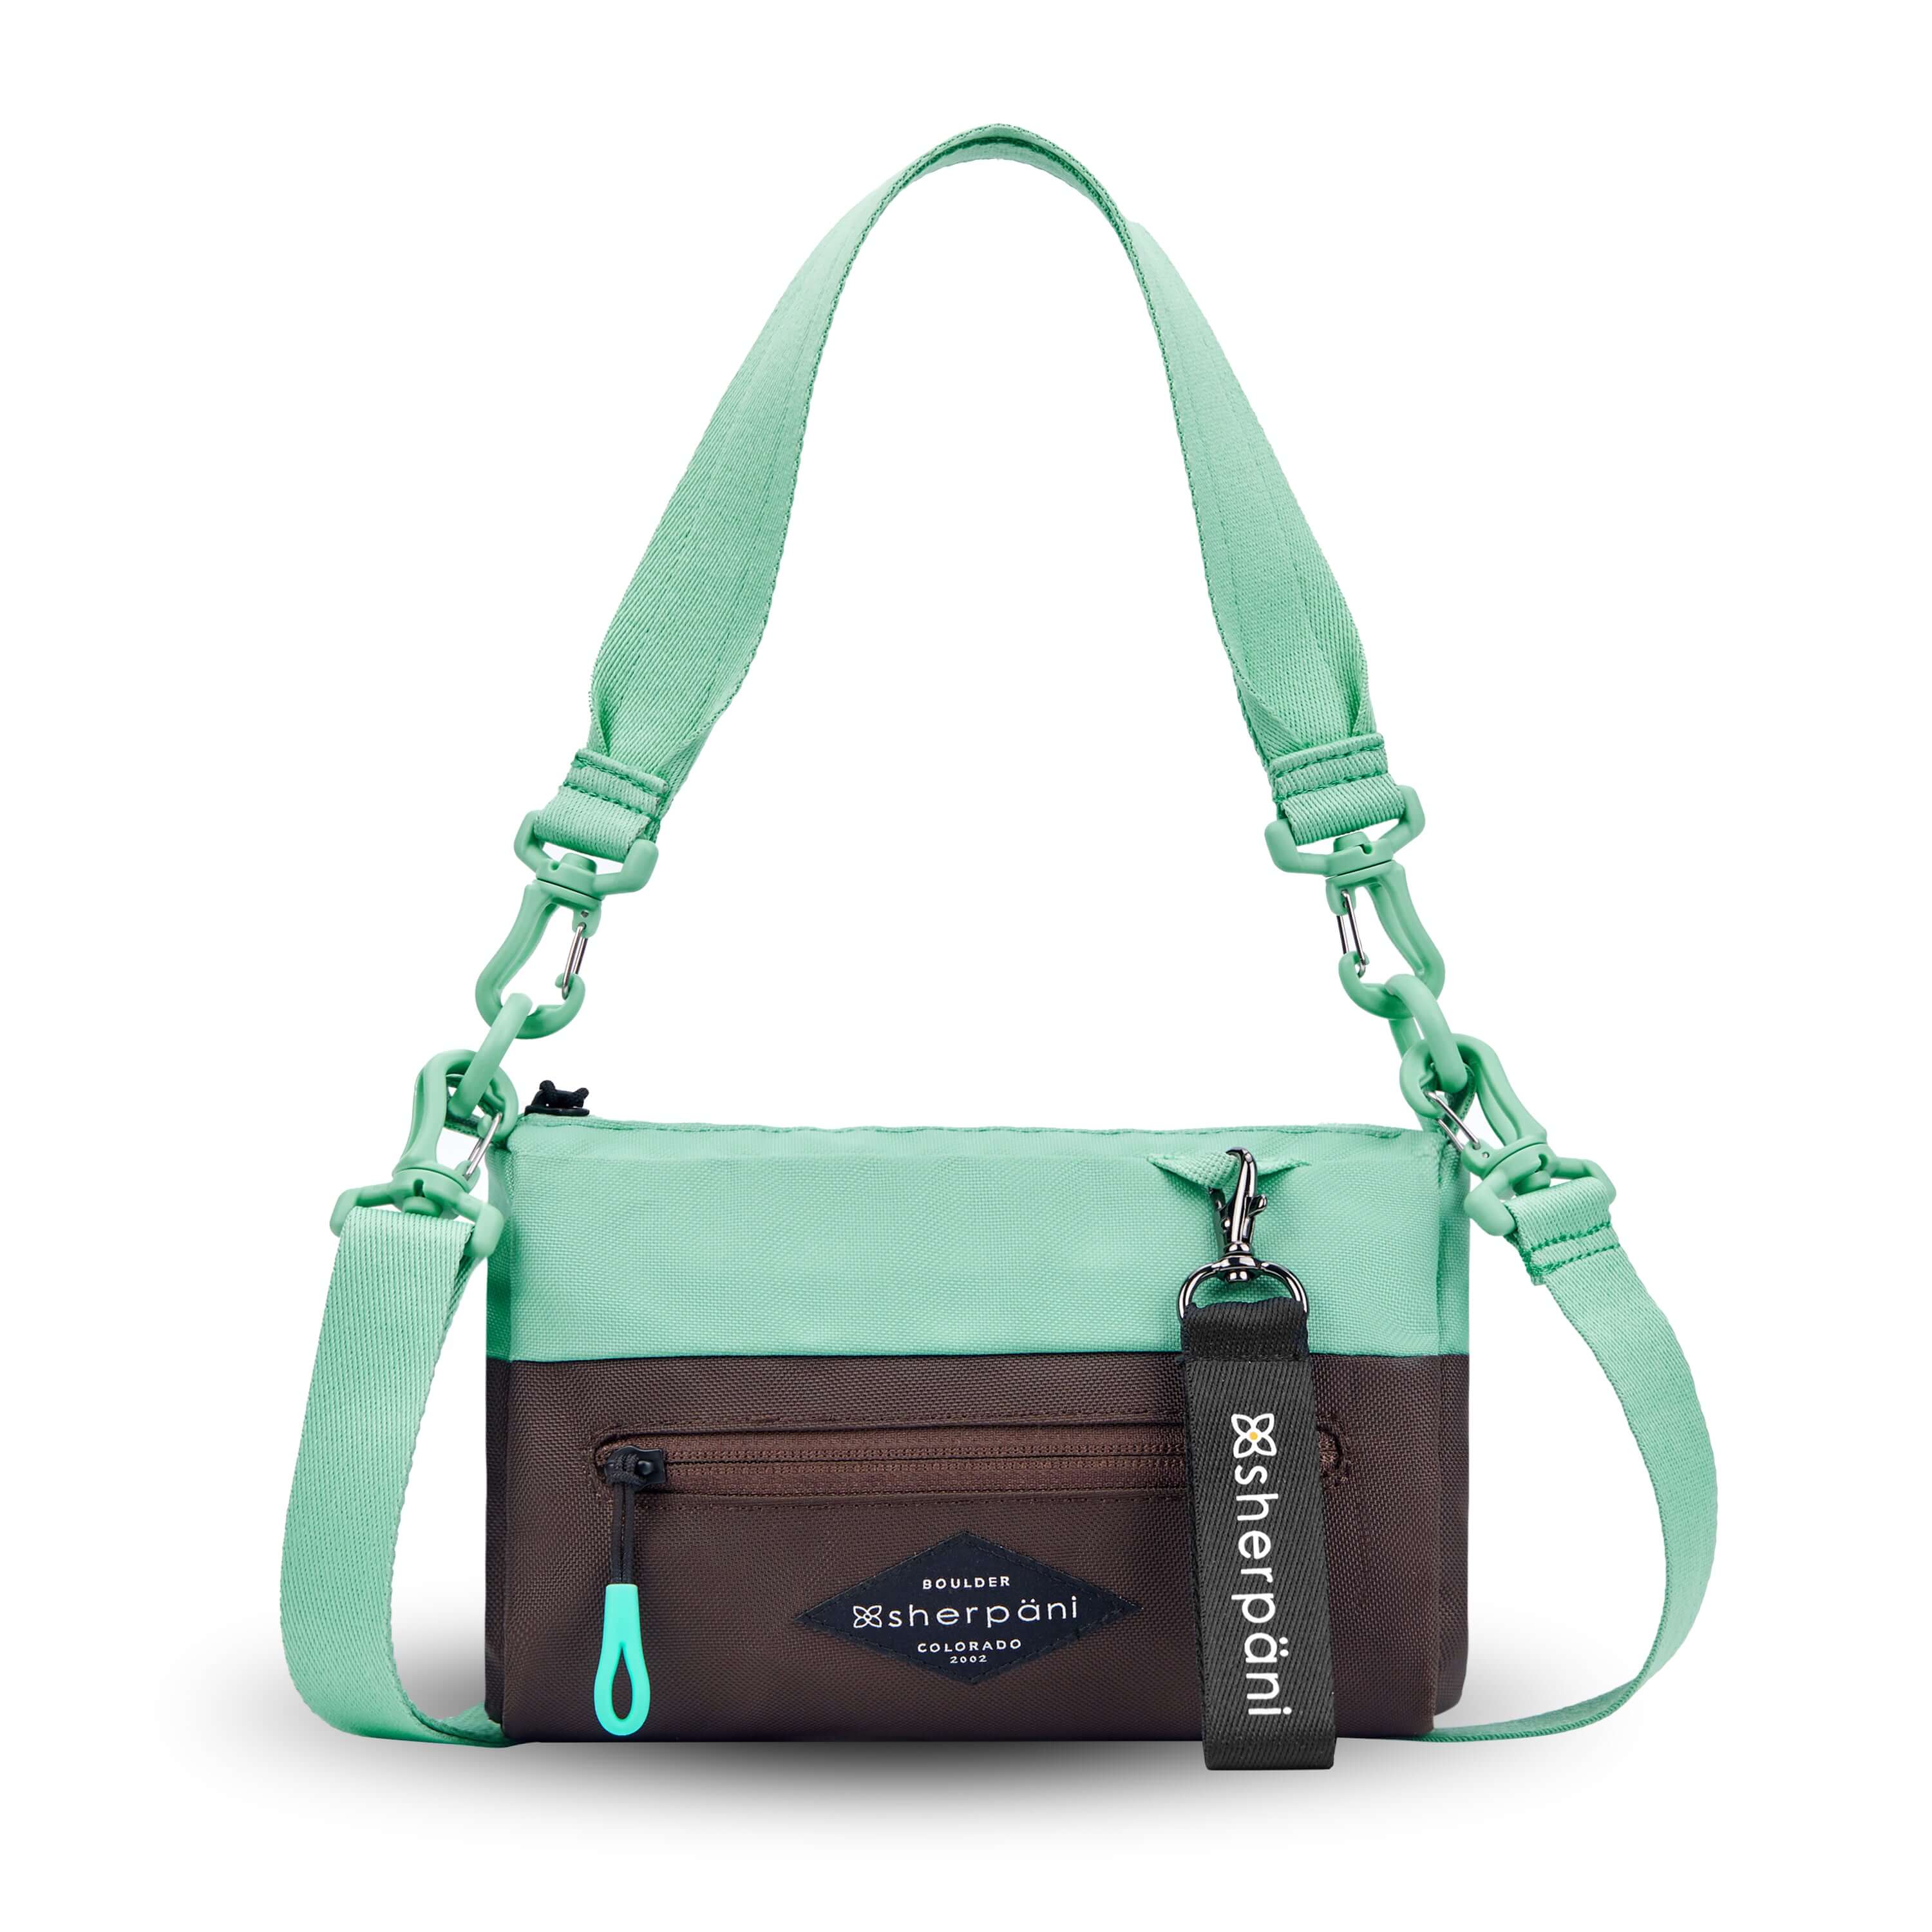 Flat front view of Sherpani's purse, the Skye in Seagreen. It is two-toned, the top half of the bag is light green and the bottom half of the bag is brown. There is an external zipper compartment with an easy-pull zipper accented in light green. There is a branded Sherpani keychain clipped to the upper right corner. The bag has a detachable short strap and a longer detachable/adjustable crossbody strap. 